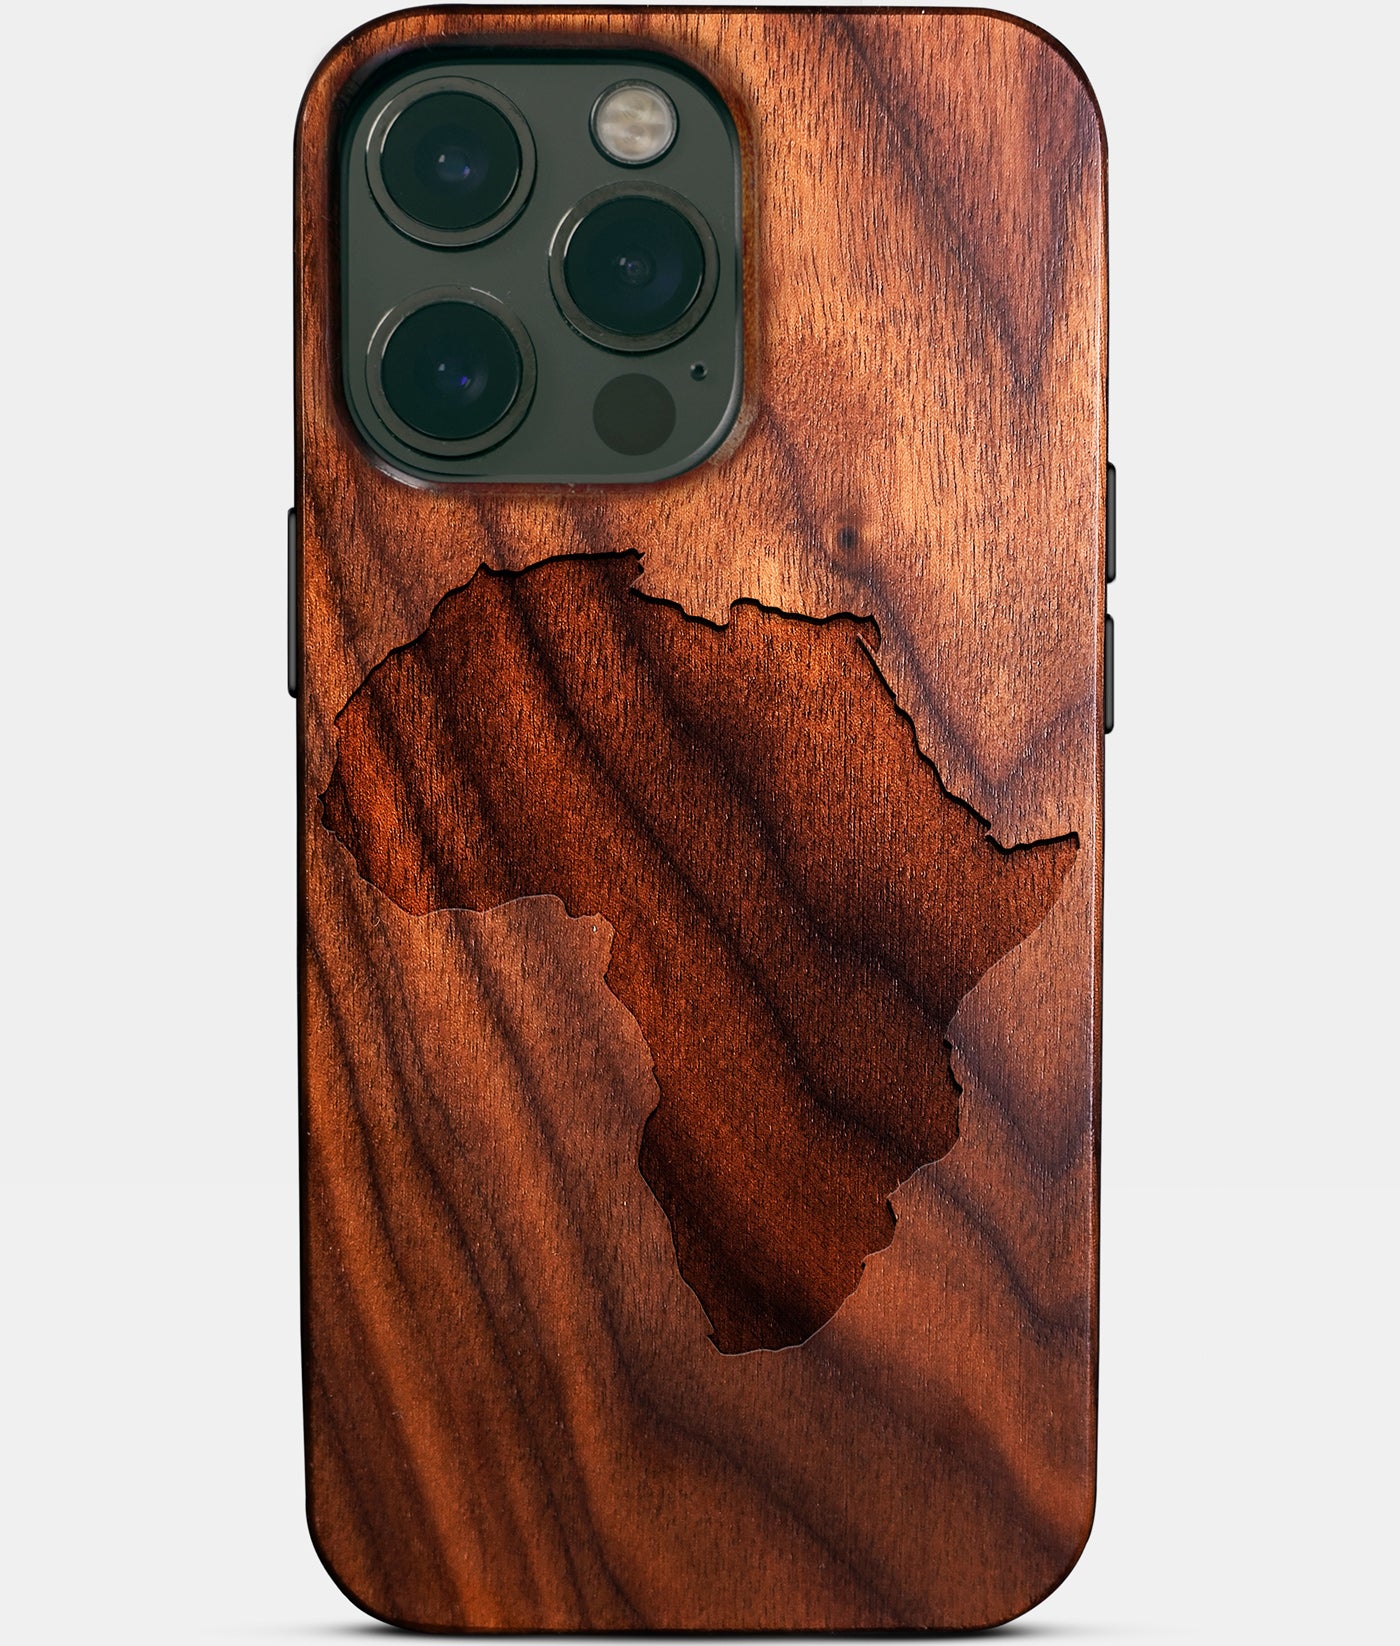 Africa Shape Map Wood iPhone 14 Pro Max Case - HBCU Gear College Graduation Gifts For Black Men And Women Black Owned Gifts 2022 Christmas Gifts - African American Black Owned Businesses iPhone 14 Pro Max Cover In Los Angeles 2022 Custom Gifts For Personalized Black Men